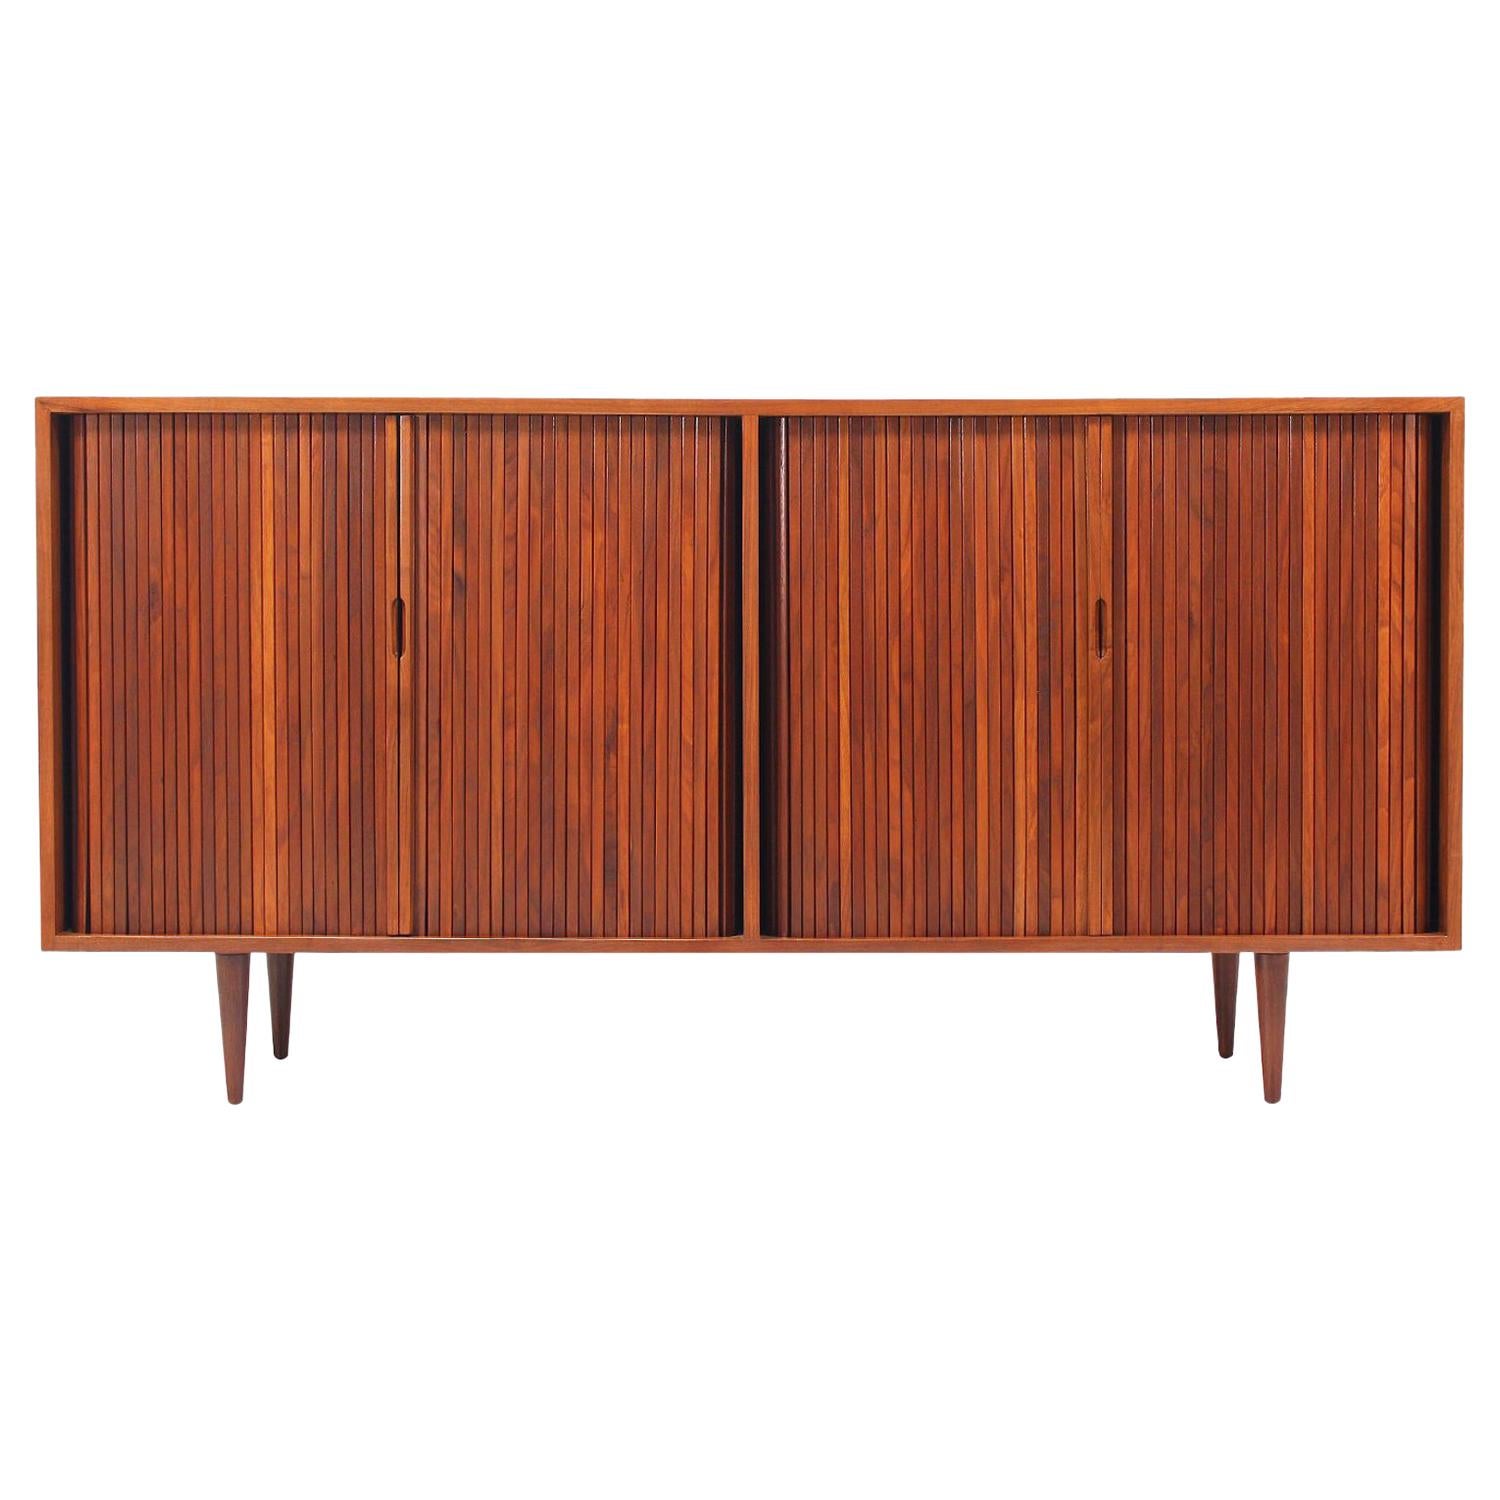 Mid-Century Modern credenza designed by Milo Baughman for Glenn of California in the United States circa 1950s. Crafted in walnut wood, this exceptional credenza features two compartments, each with its set of tambour doors and carved, recessed